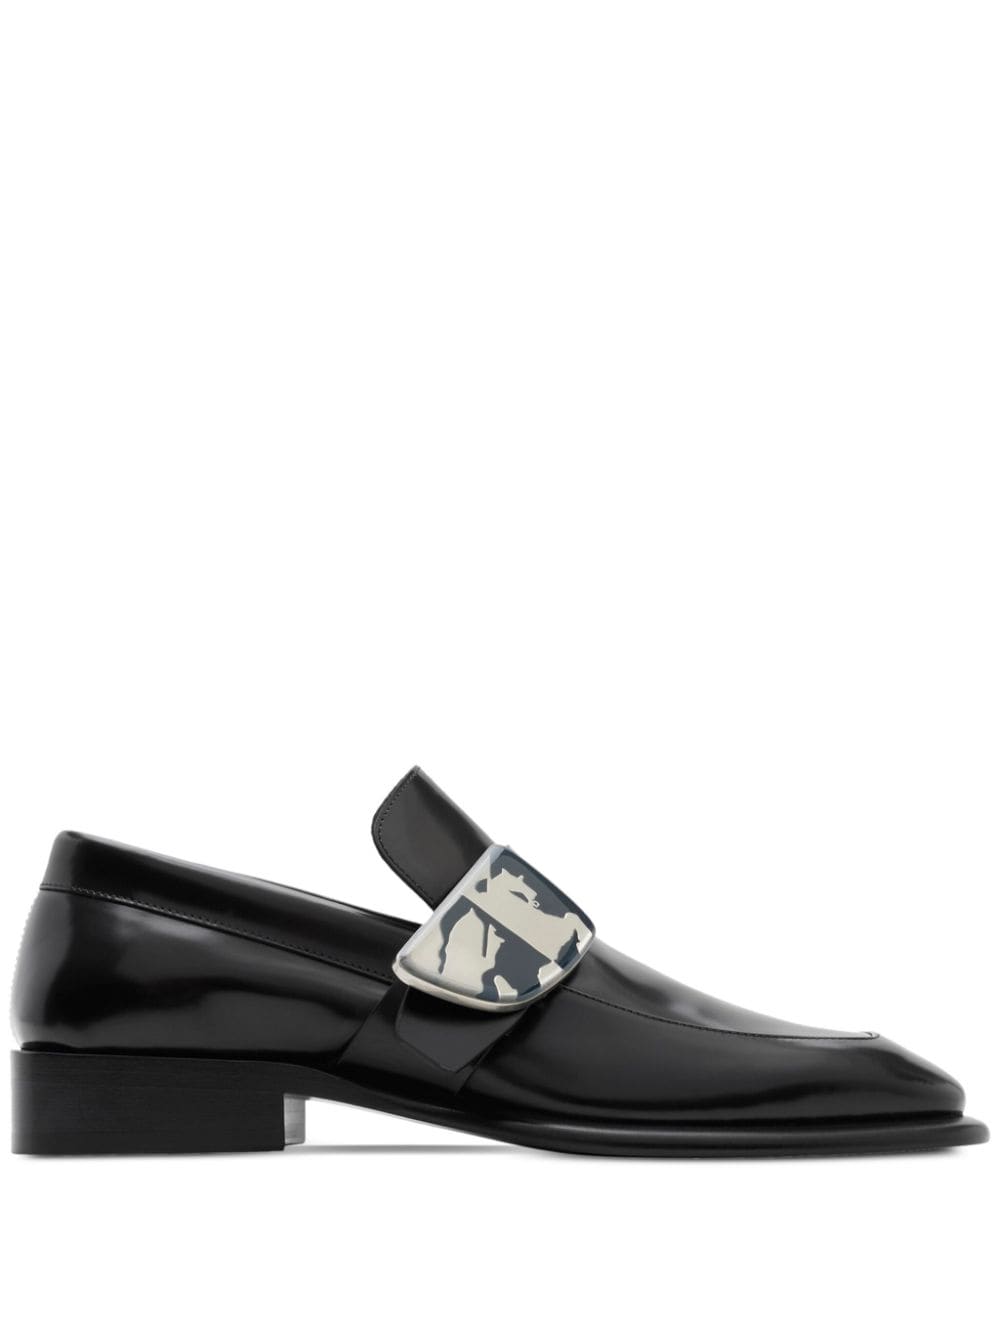 Burberry Shield leather loafers - Black von Burberry